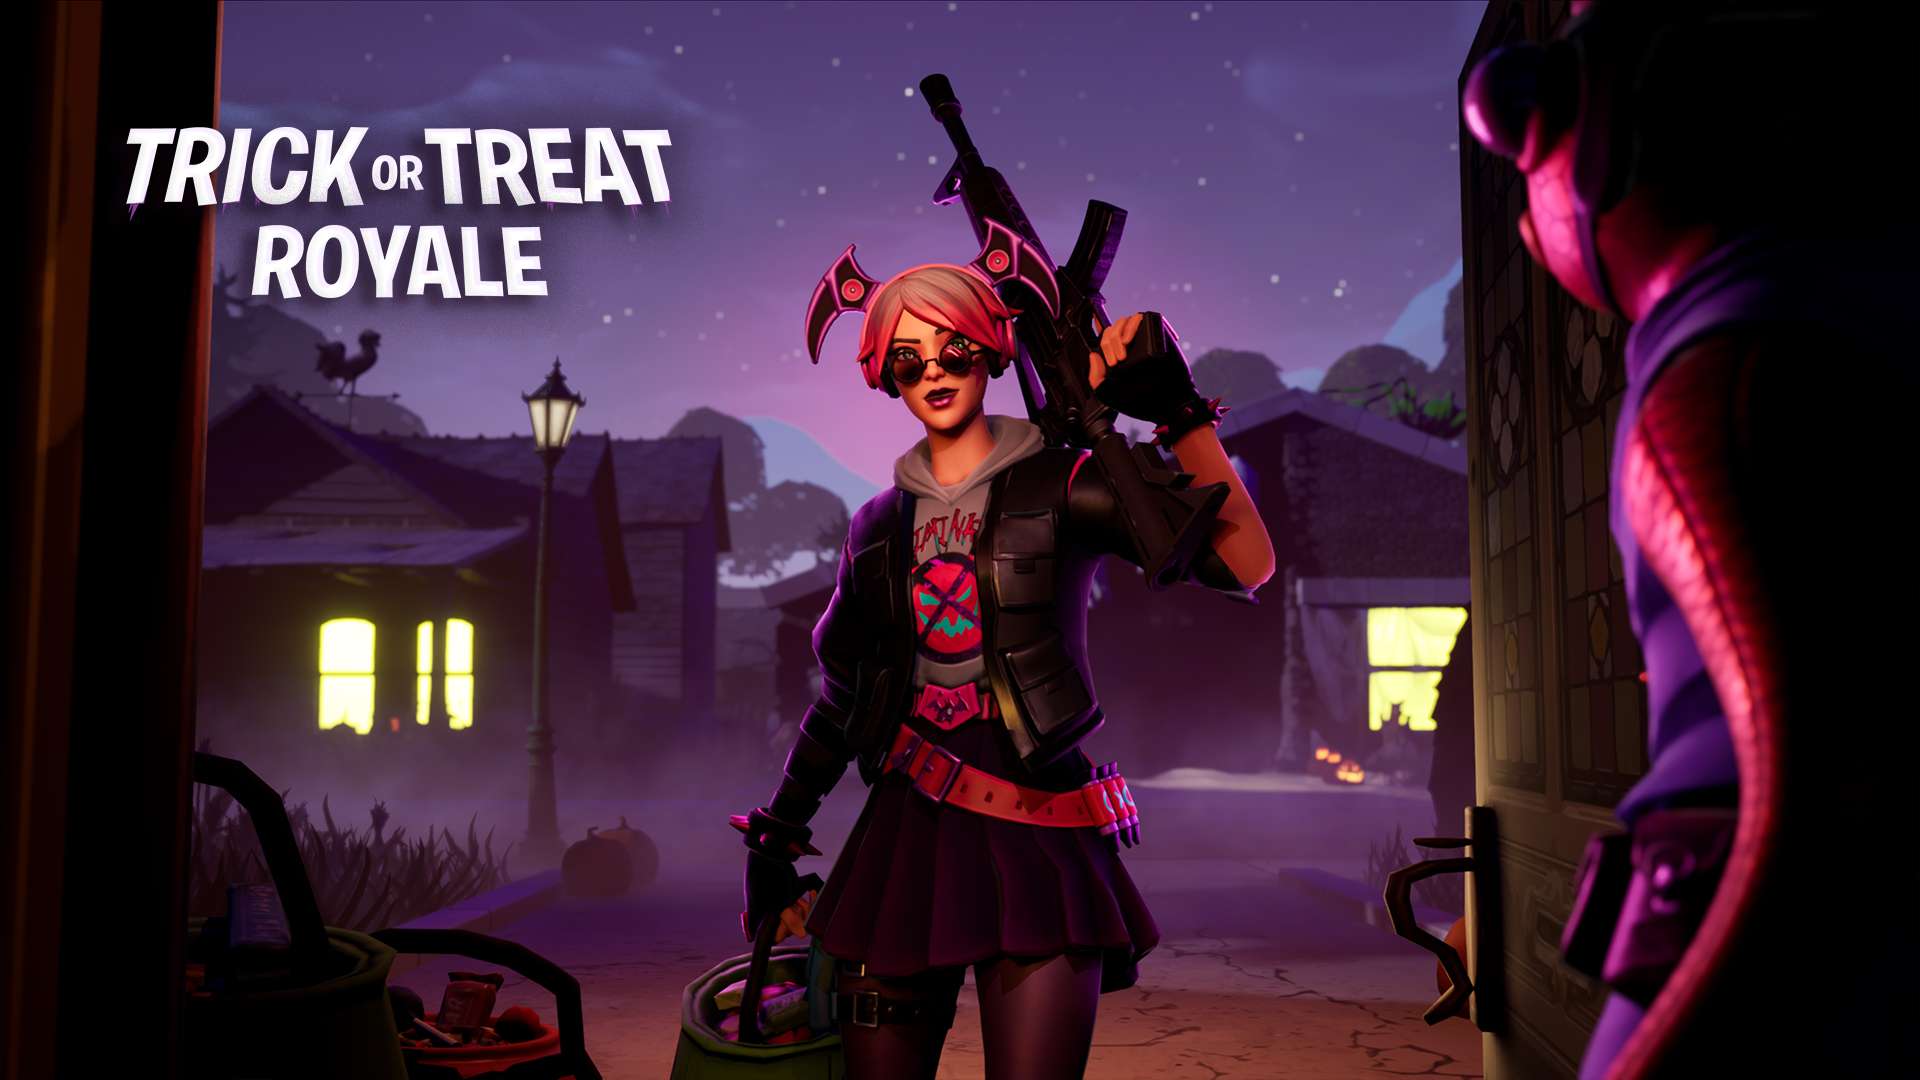 TRICK OR TREAT ROYALE 8337-9869-0418